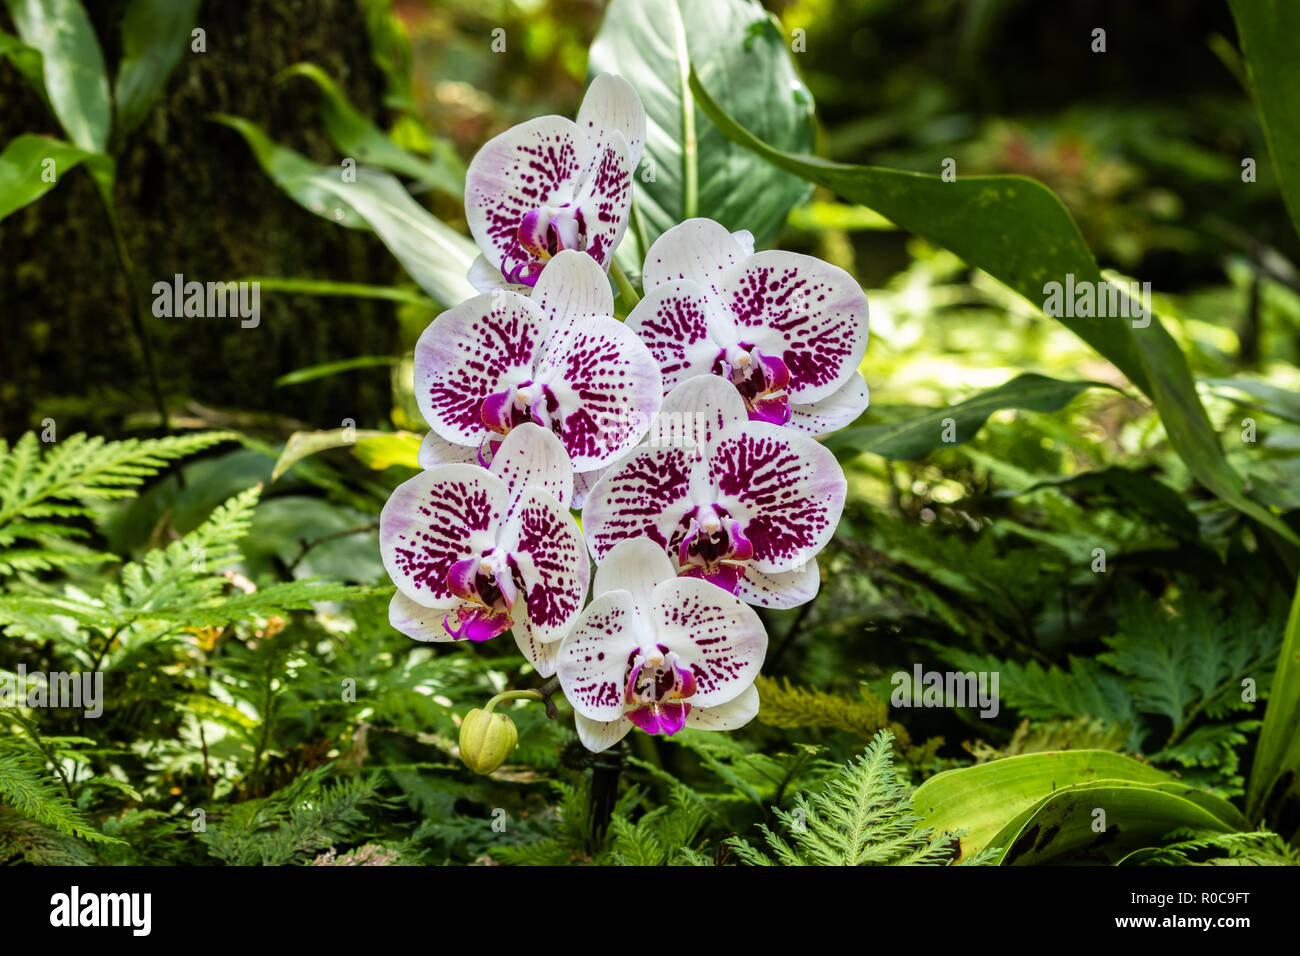 Bunch of phalaenopsis (moth shaped) orchids at Botanical garden in Hilo, Hawaii. White petals speckled with purple. Stock Photo